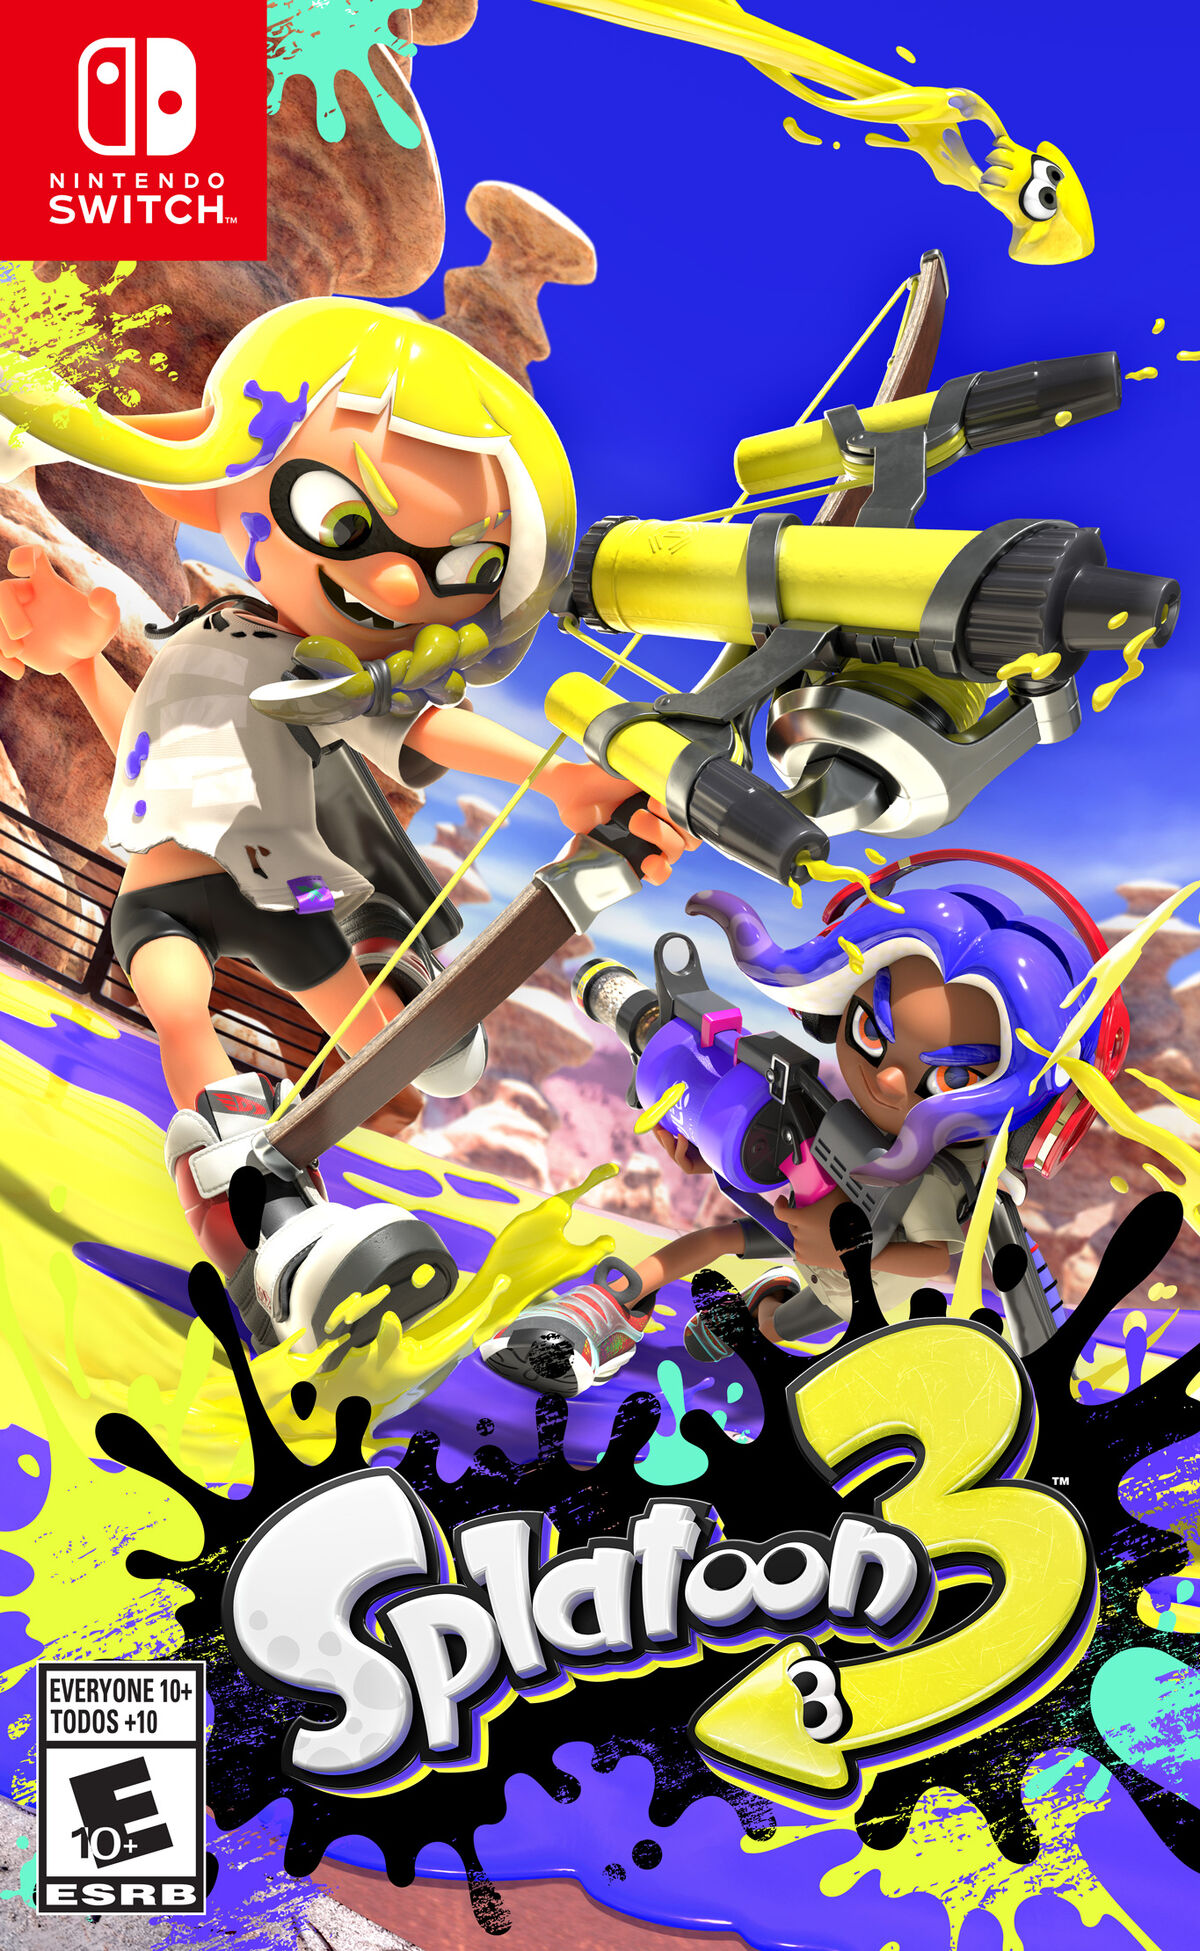 https://static.wikia.nocookie.net/splatoon/images/2/29/Splatoon_3%27s_Cover.jpg/revision/latest/scale-to-width-down/1200?cb=20220424040046